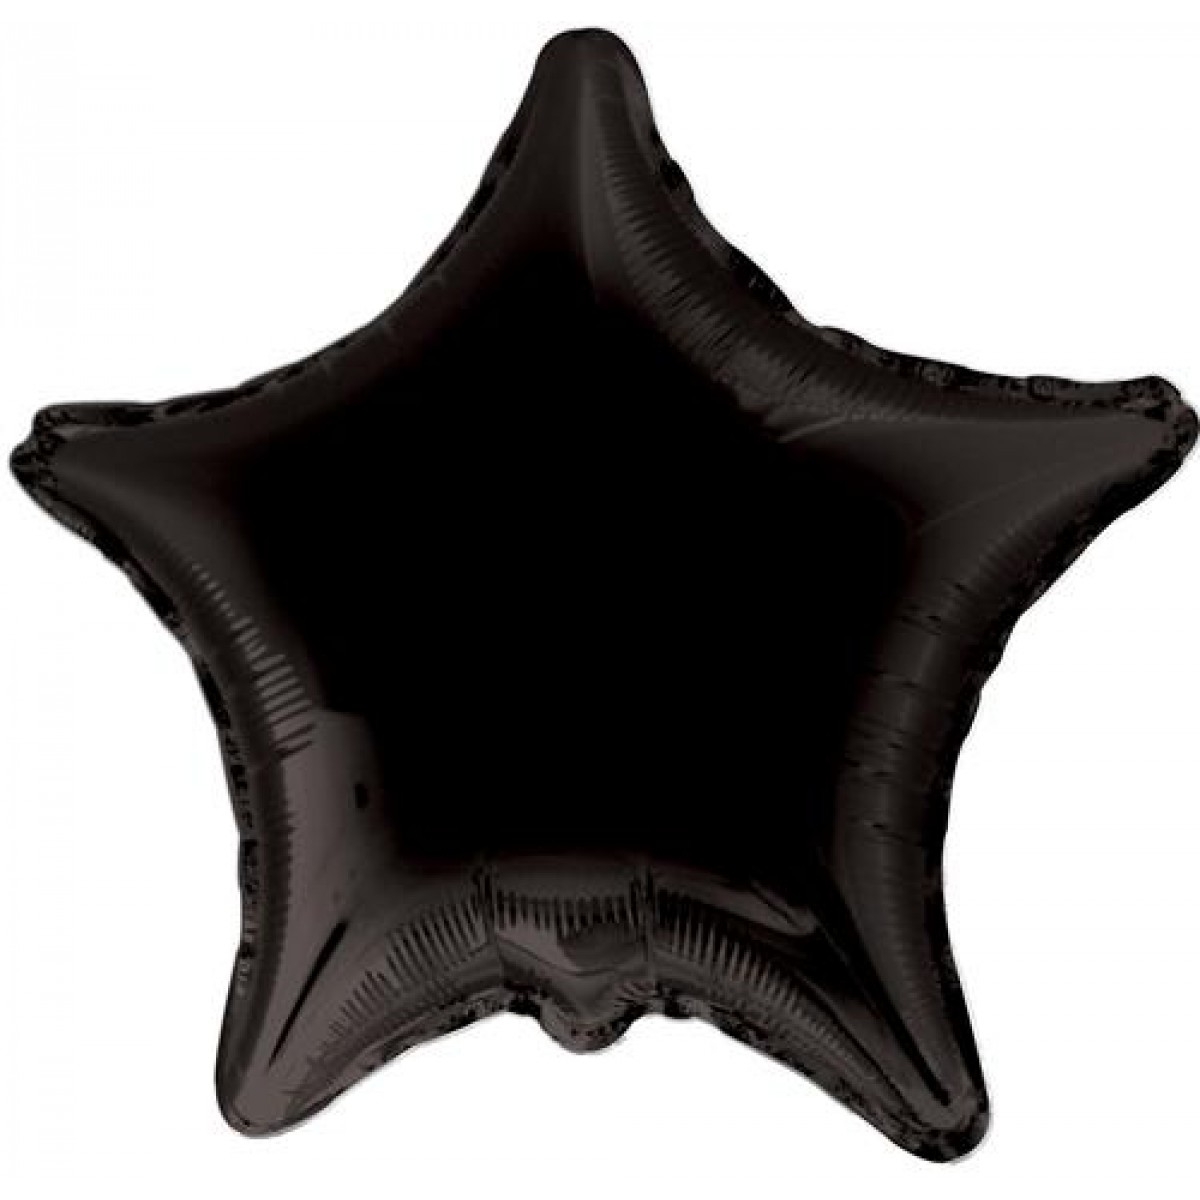 4" Star Black Airfill Heat Seal Required balloon